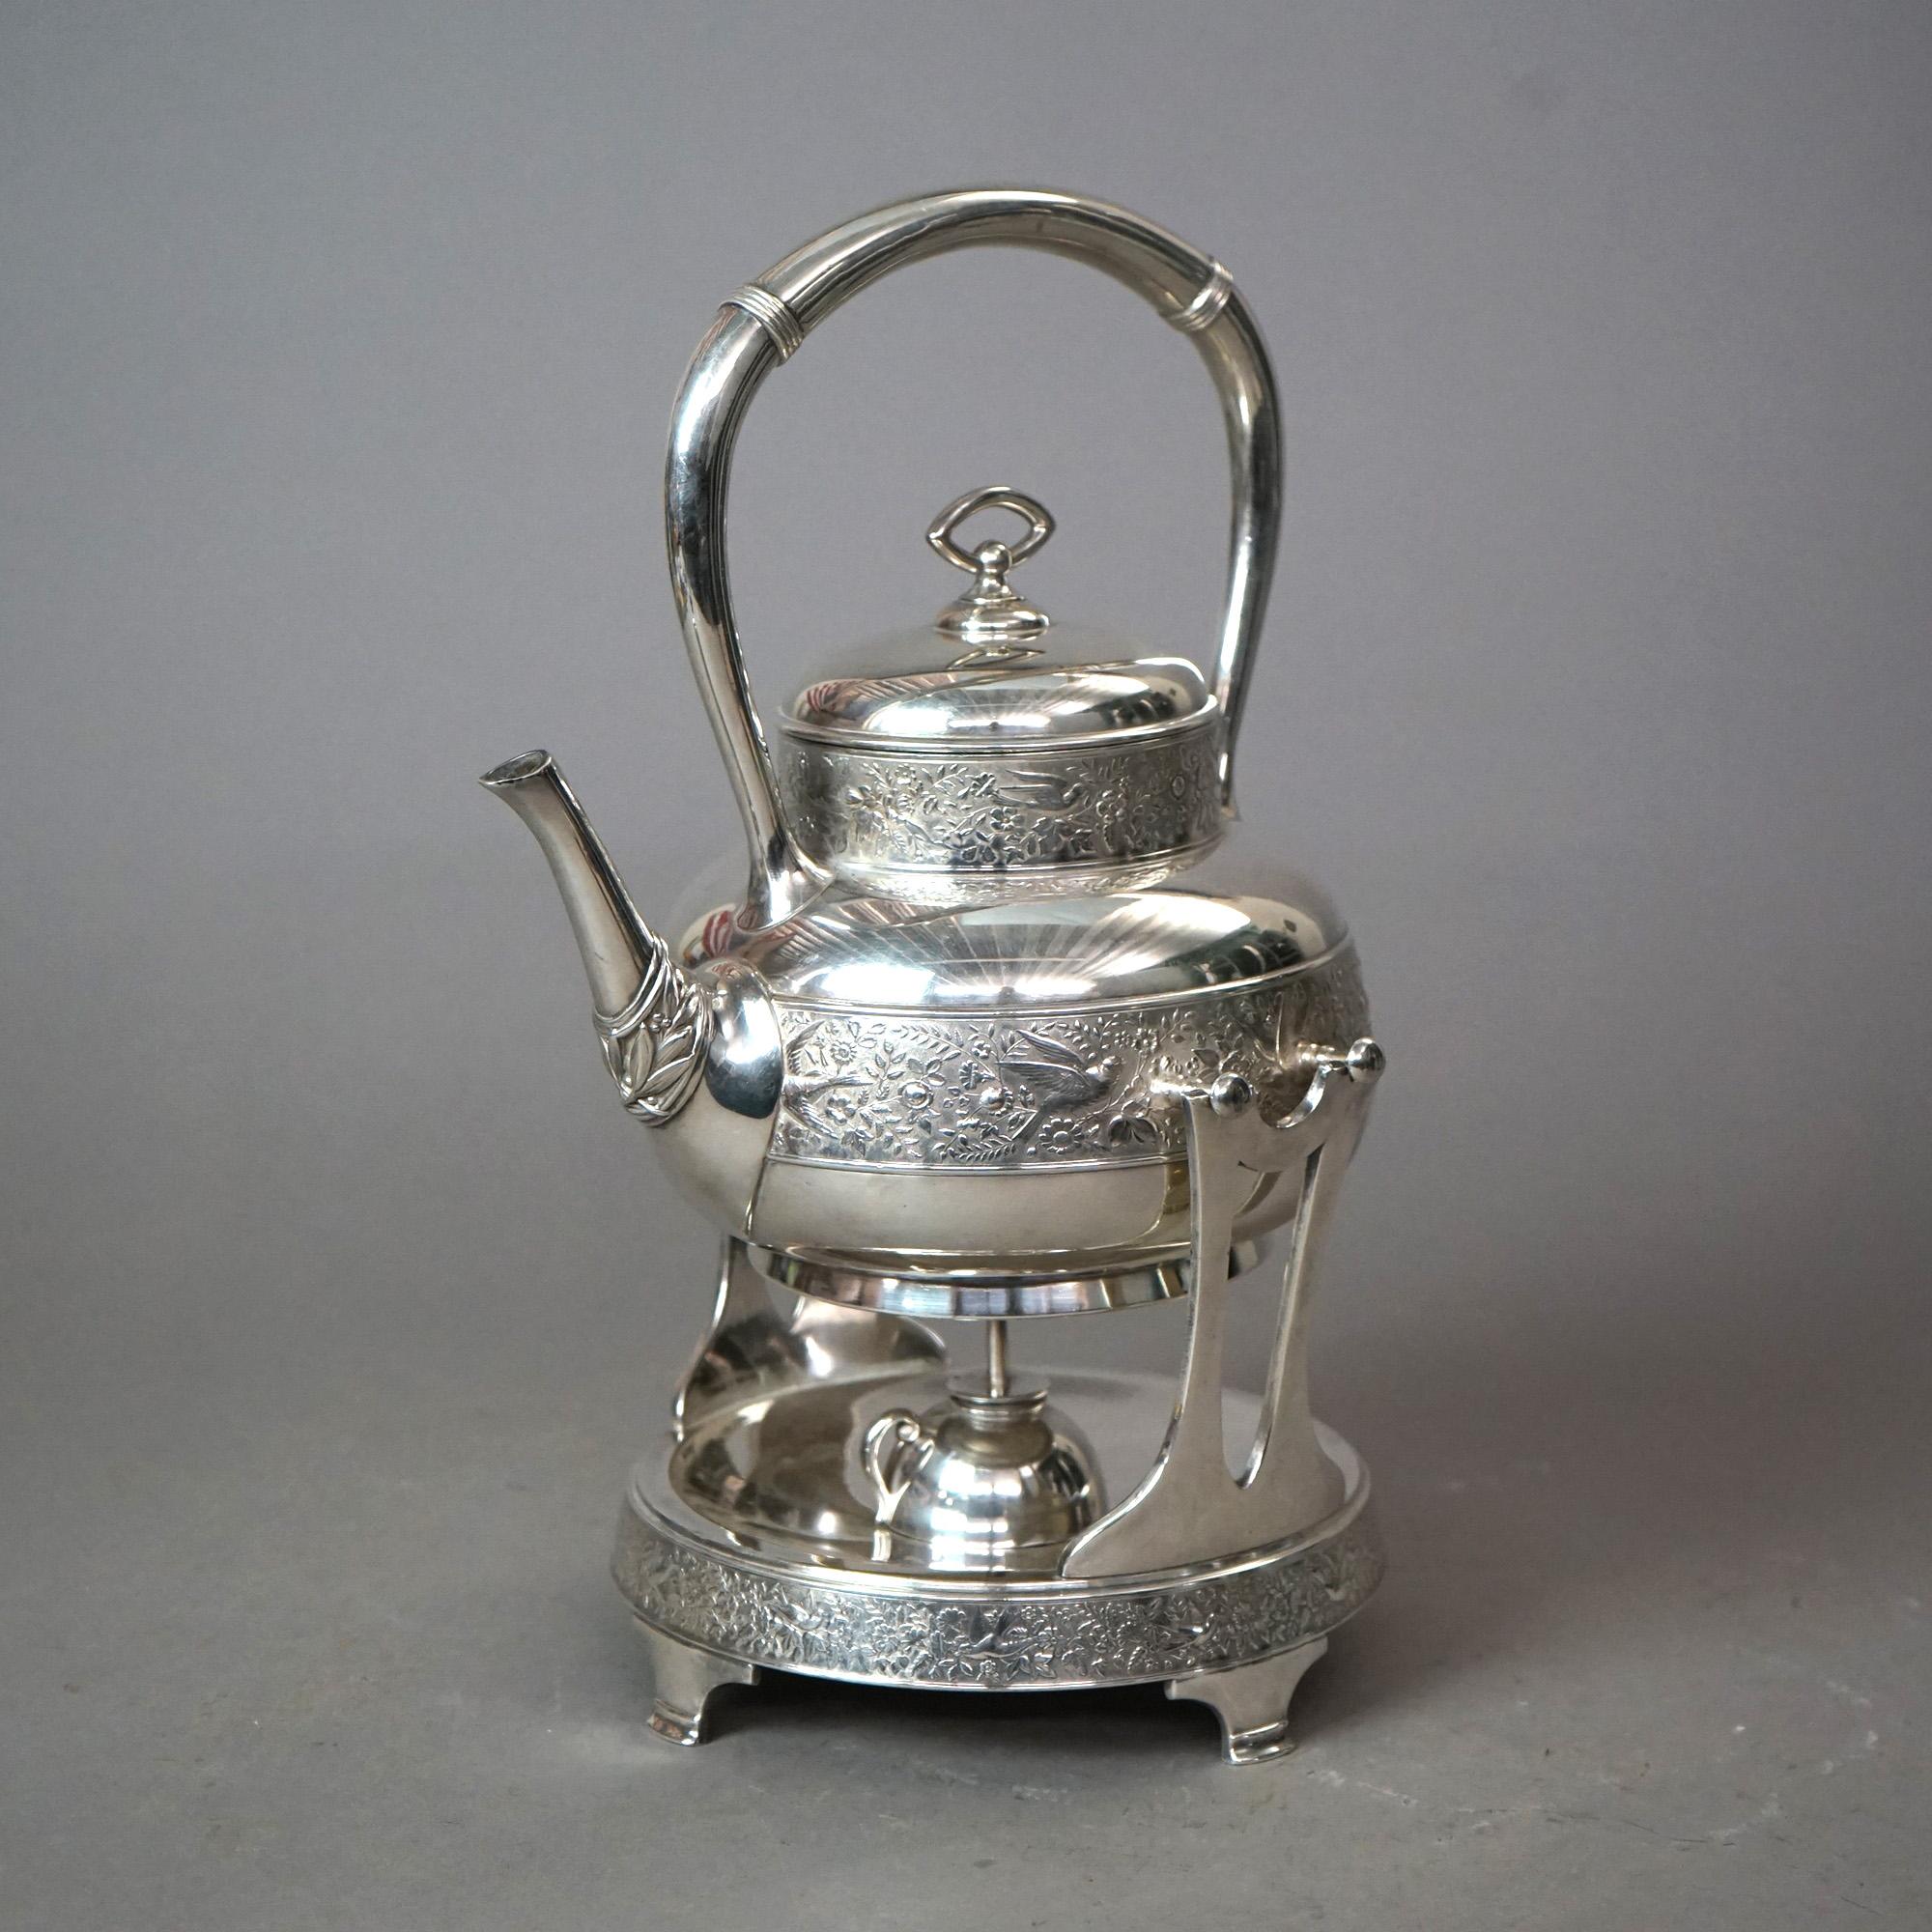 American Antique Rogers Aesthetic Silver Plated Tilting Teapot & Stand with Birds C1870